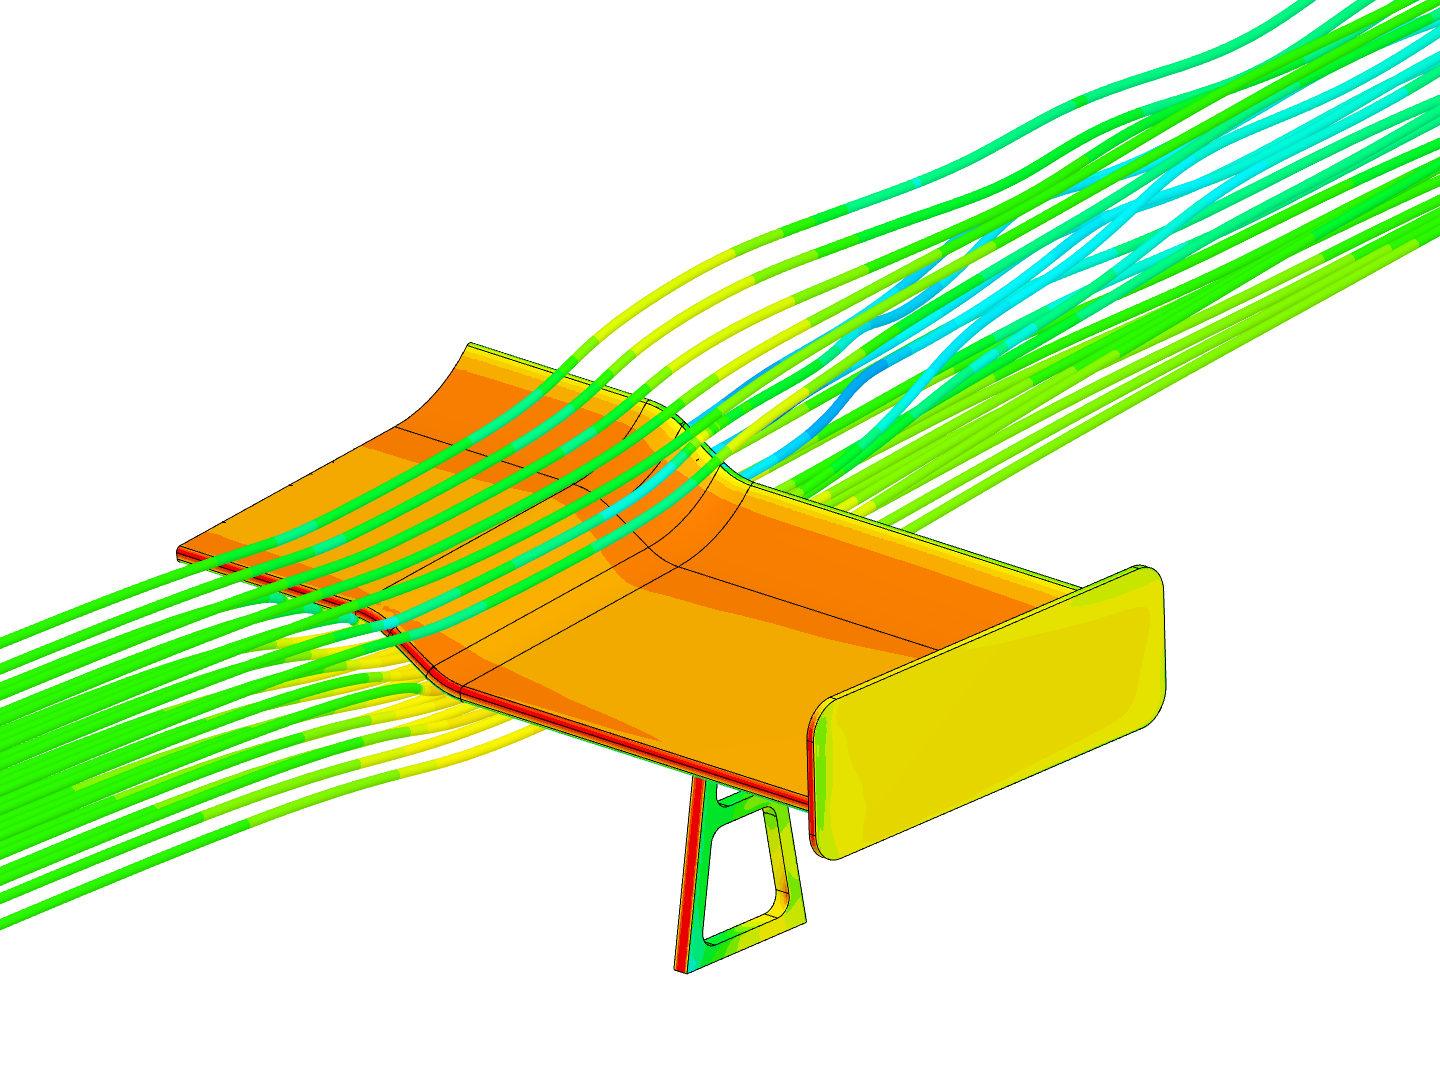 Airflow Around a GT Car Spoiler by Hassaan - Coursera image